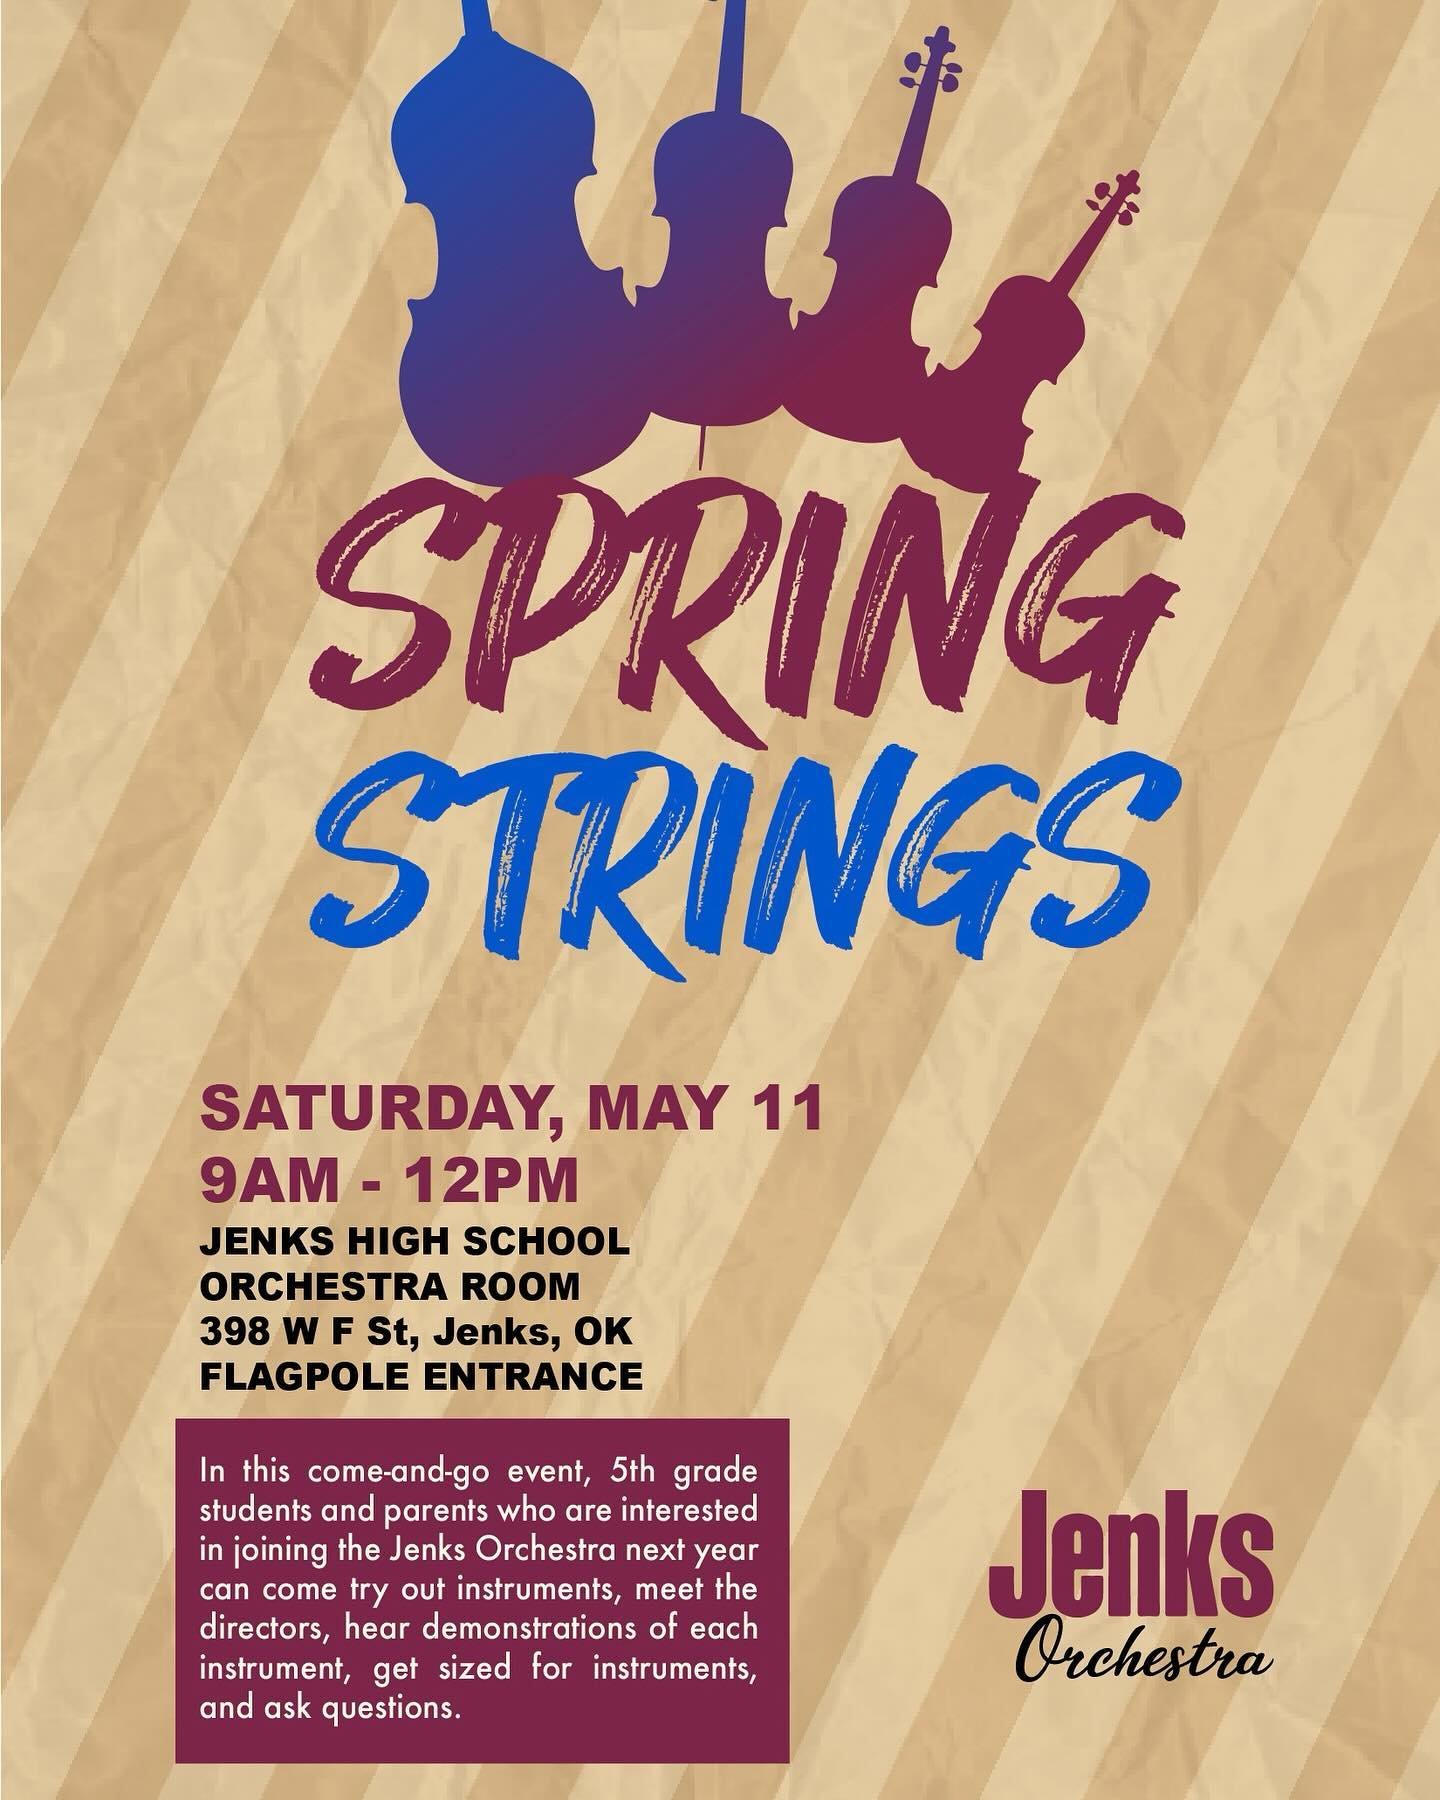 Do you know any 5th grade students who are interested in joining the Jenks Orchestra next year? Let them know about the Spring Strings event happening this upcoming Saturday!